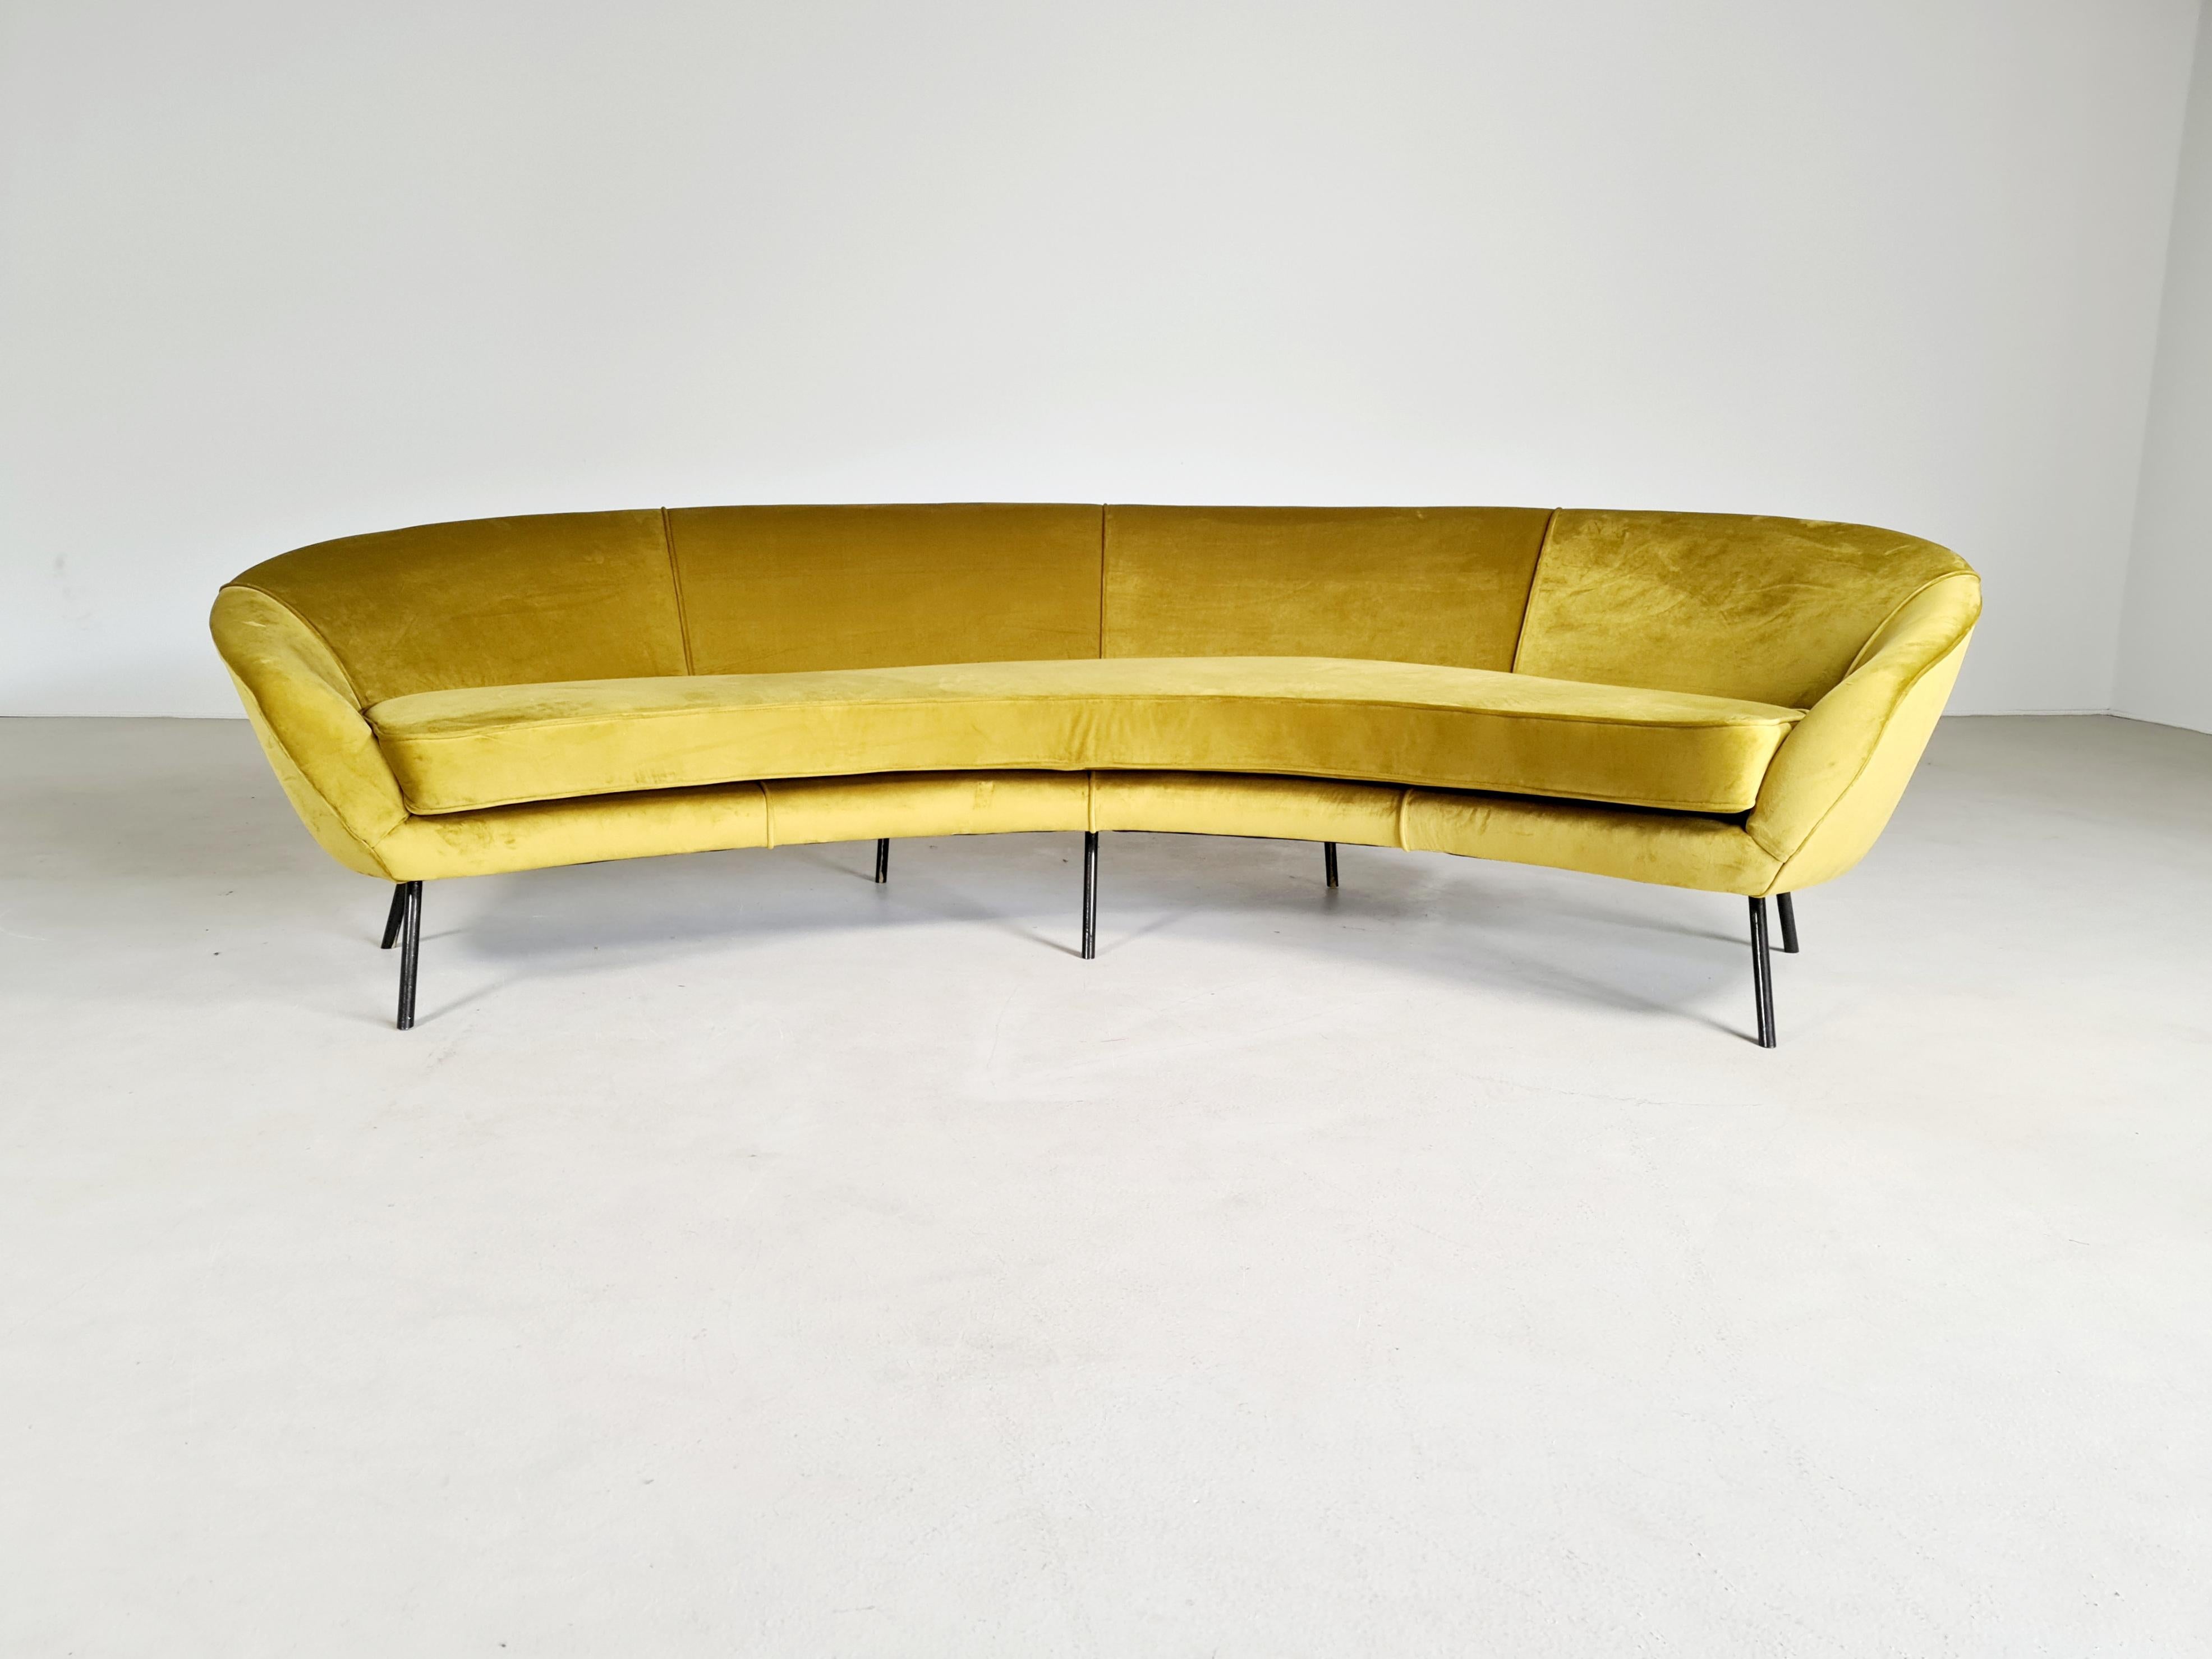 A large Italian curved asymmetrical sofa in the style Ico Parisi or Federico Munari, on steel feet, and newly upholstered in green/gold velvet.